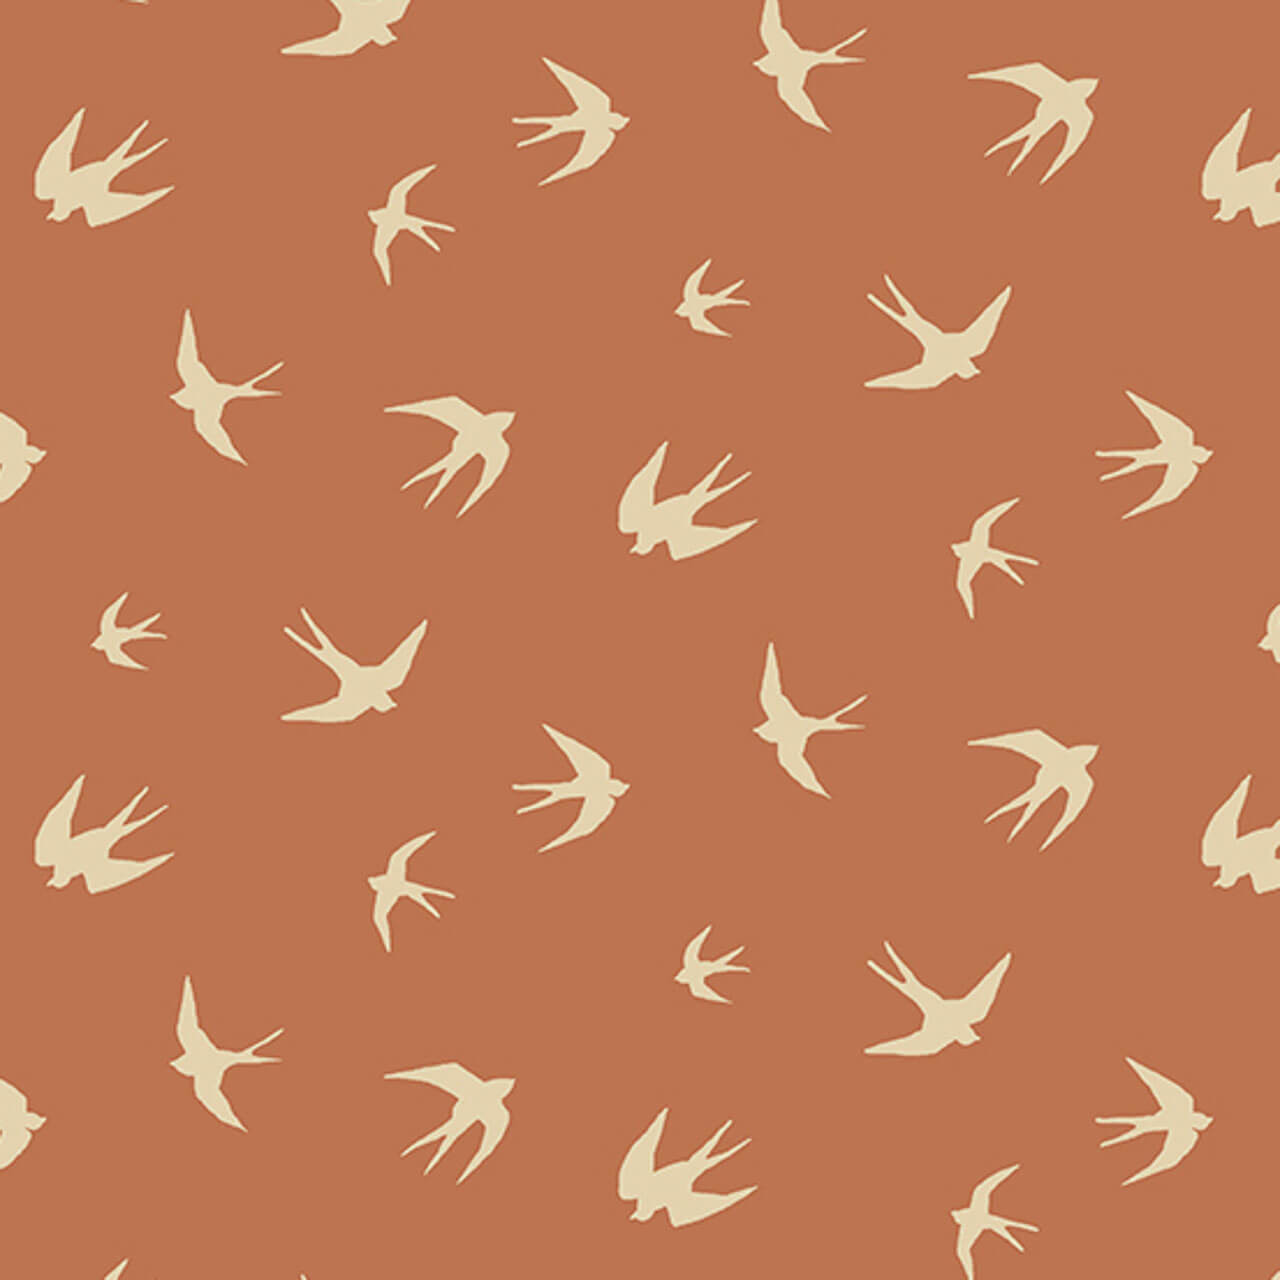 Orange 'Beaches in Copper' fabric featuring bird silhouettes from the Verdigris collection by Libs Elliott for Andover Fabrics.